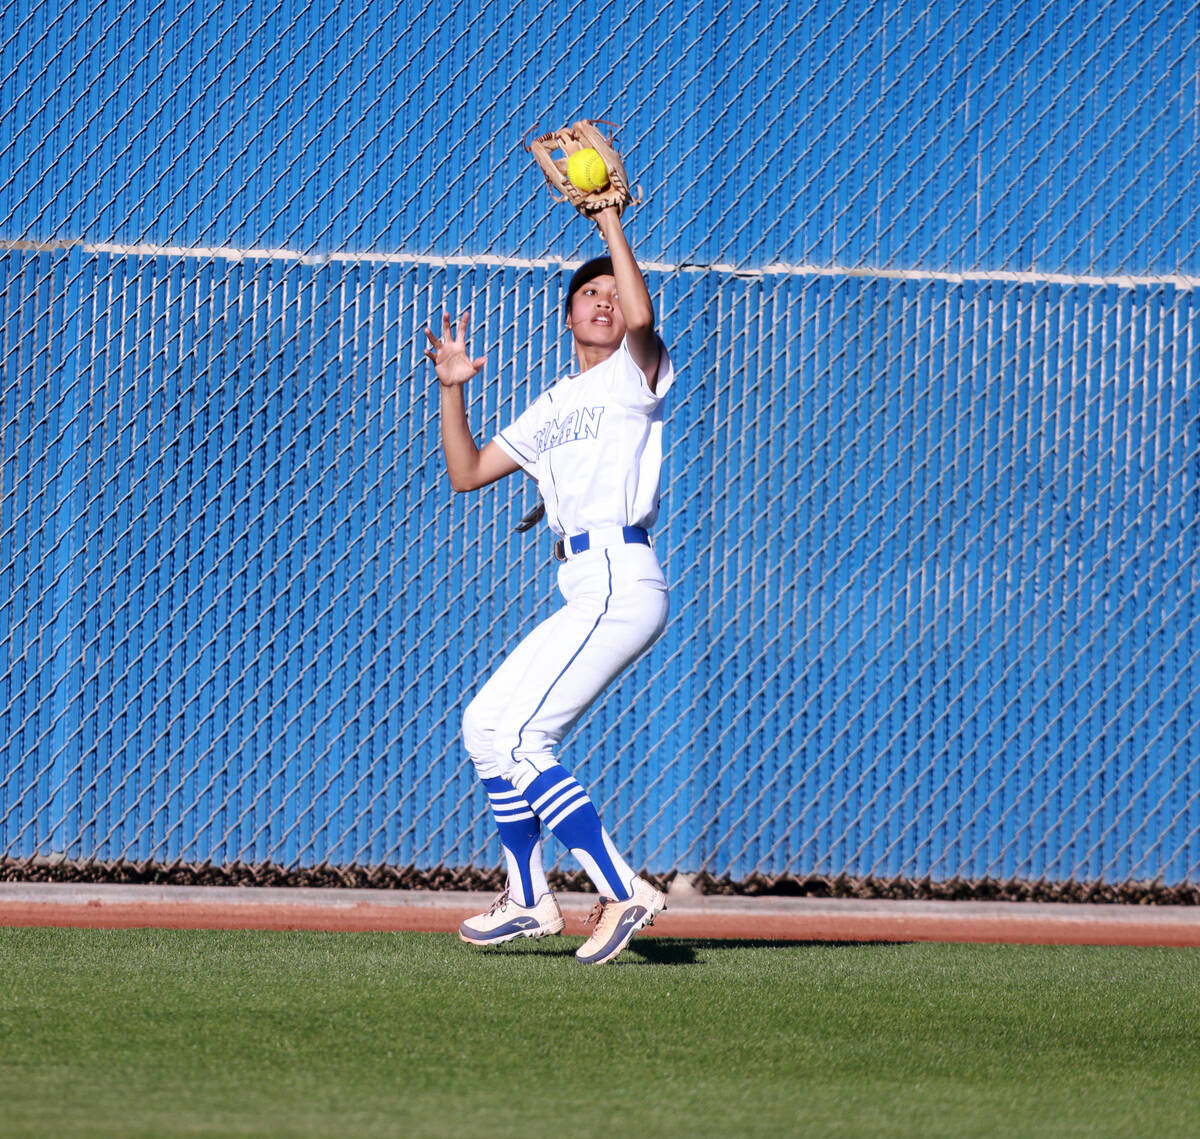 Bishop Gorman outfielder Brooklyn Hicks (1) brings in the ball against Green Valley in the sixt ...